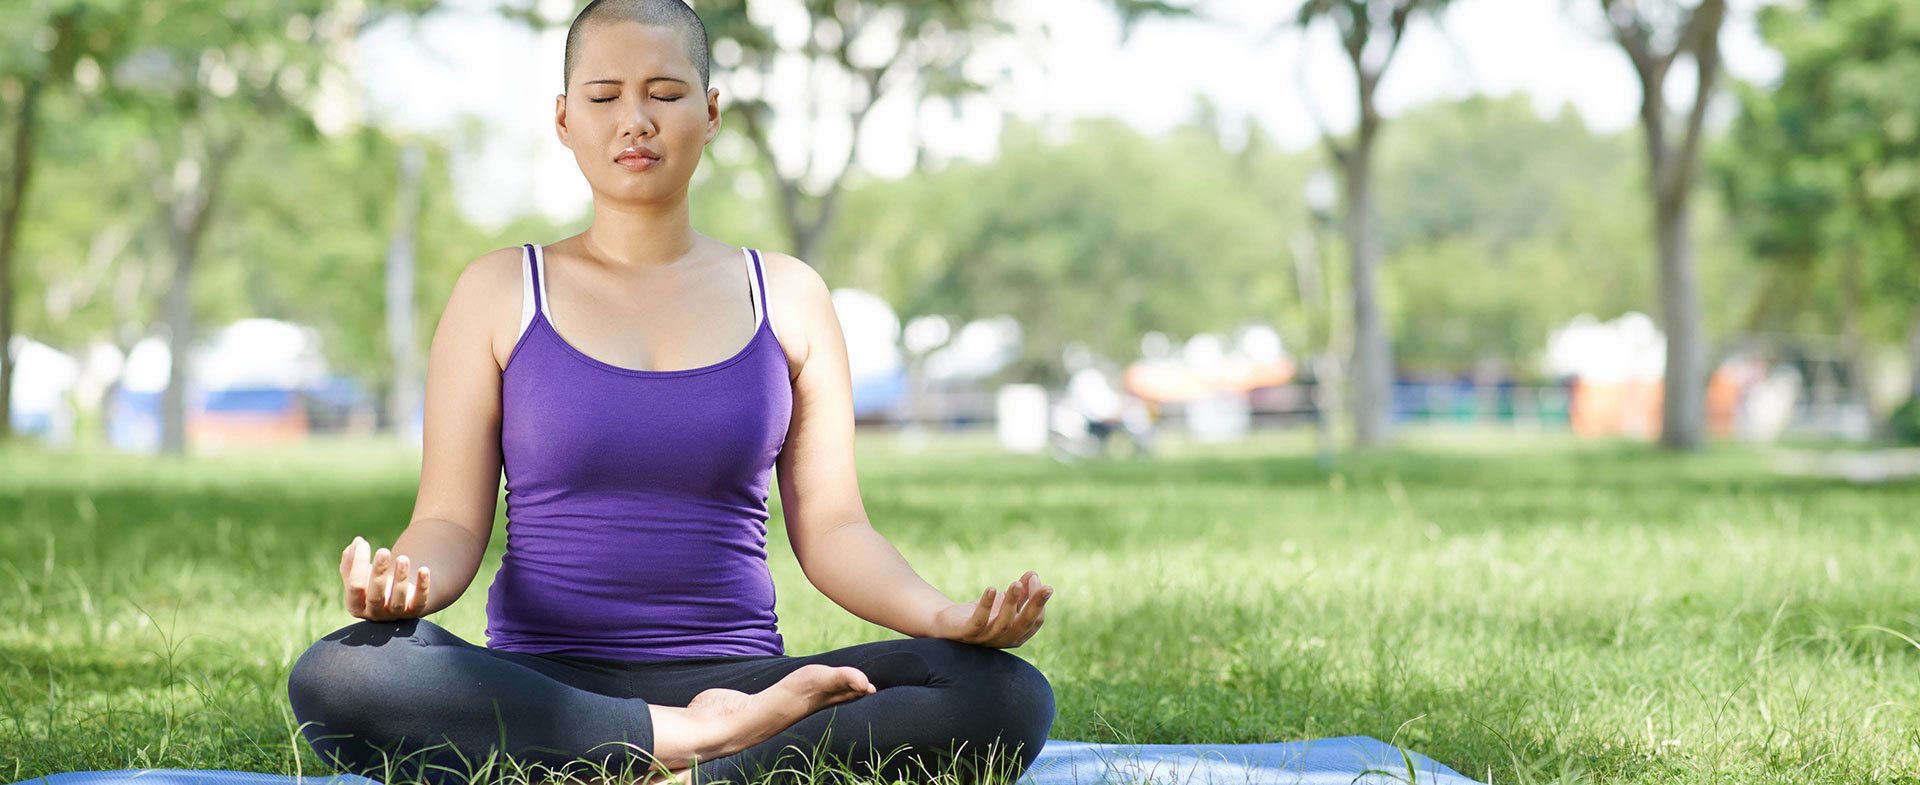 Breast Cancer And The Benefits Of Yoga